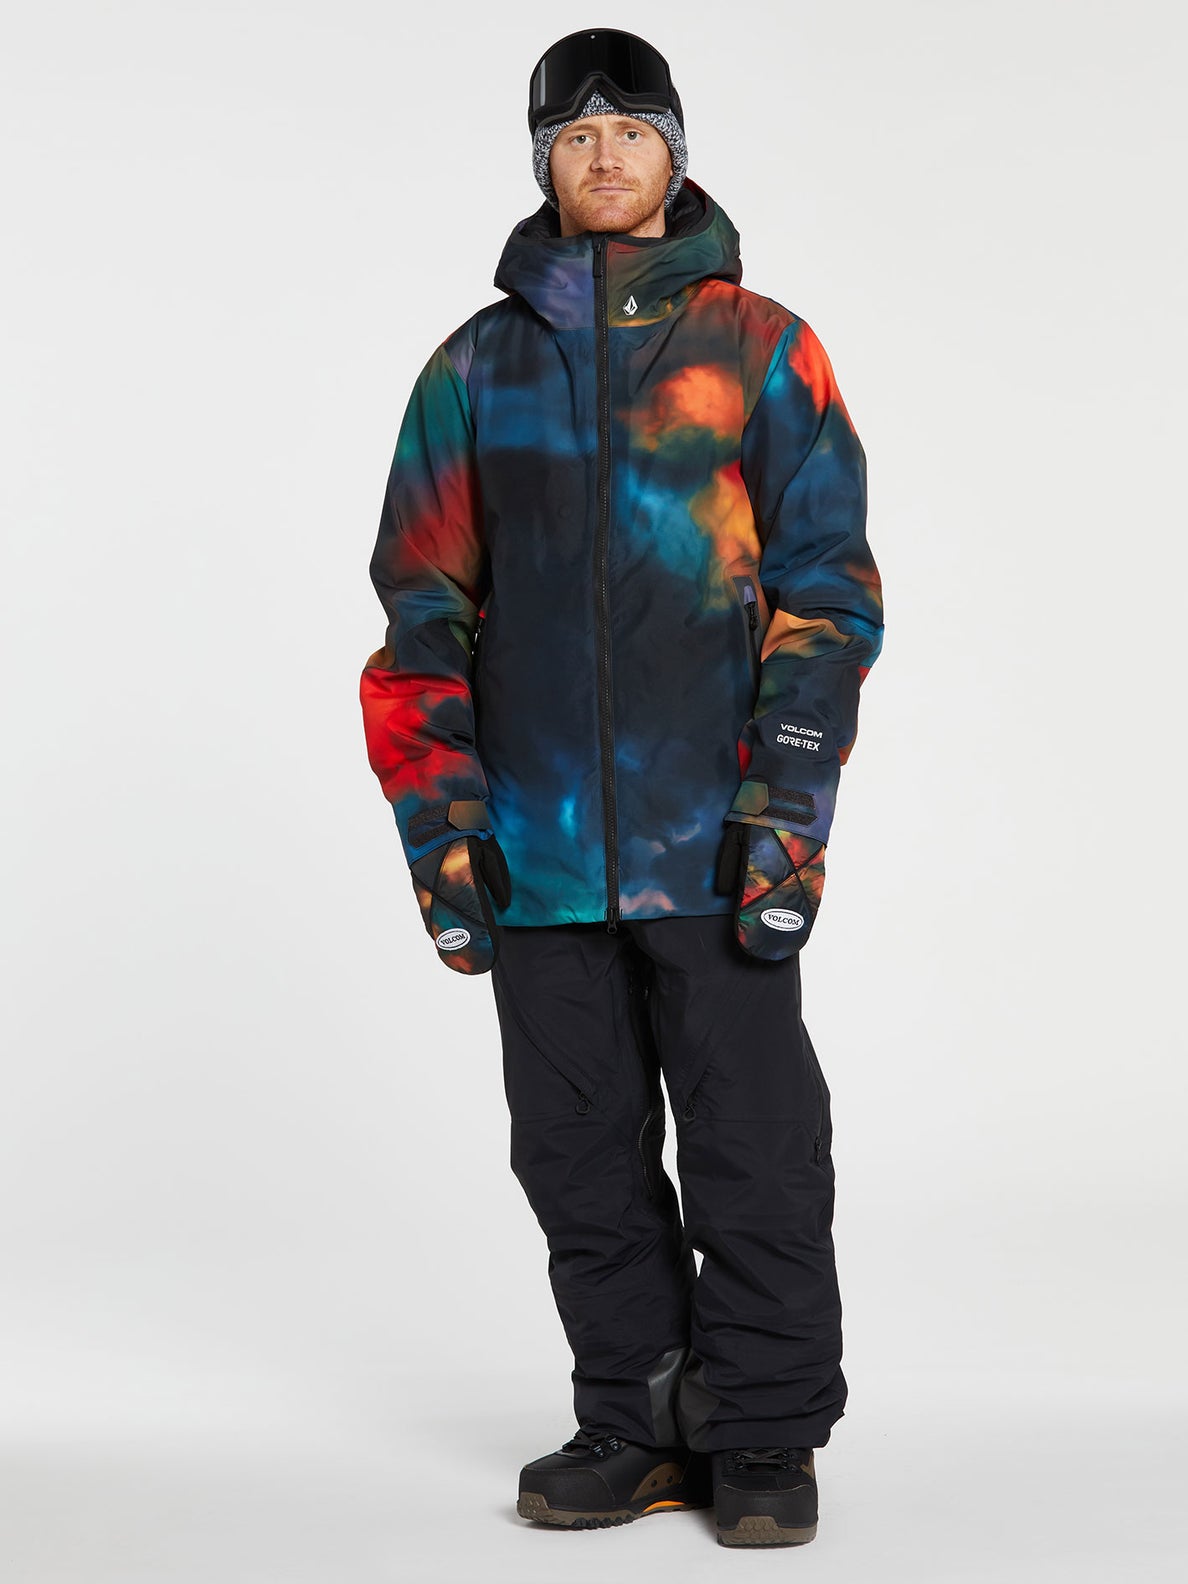 Volcom Debuts U.S. Snowboard Uniforms for the Olympic Winter Games